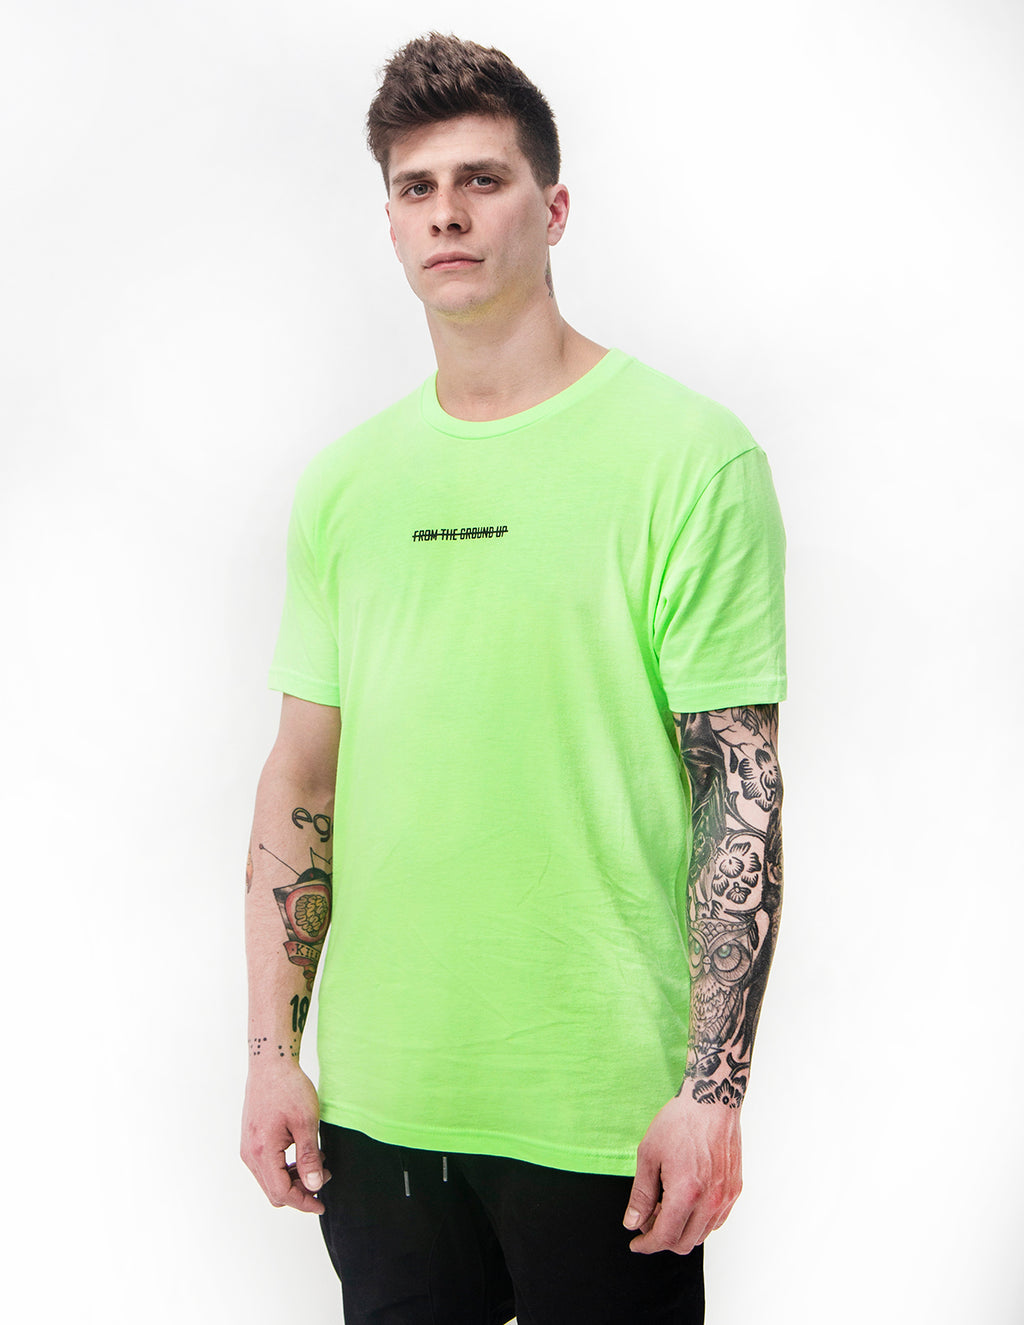 From The Ground Up Tee - Neon Green